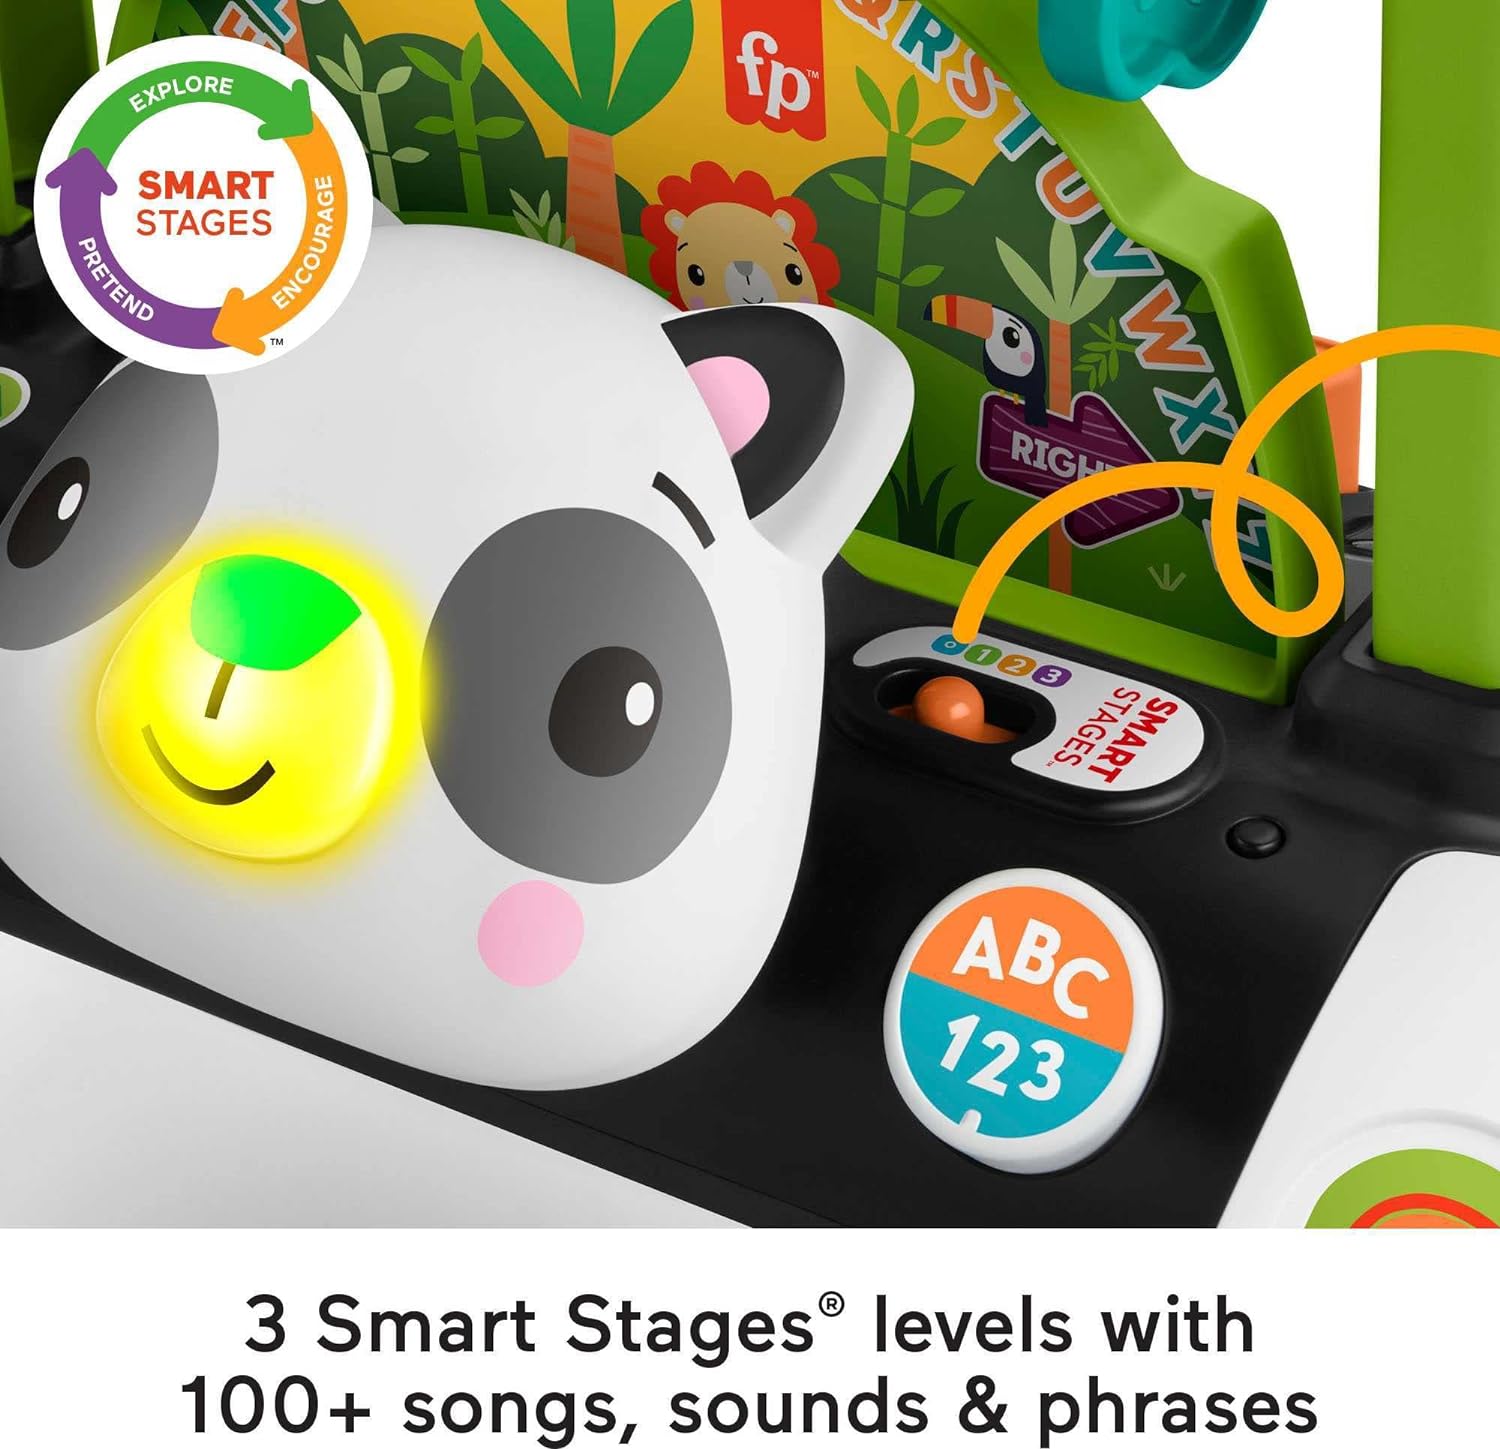 Fisher-Price Baby & Toddler Toy 2-Sided Steady Speed Panda Walker With Smart Stages Learning & Blocks For Ages 6+ Months